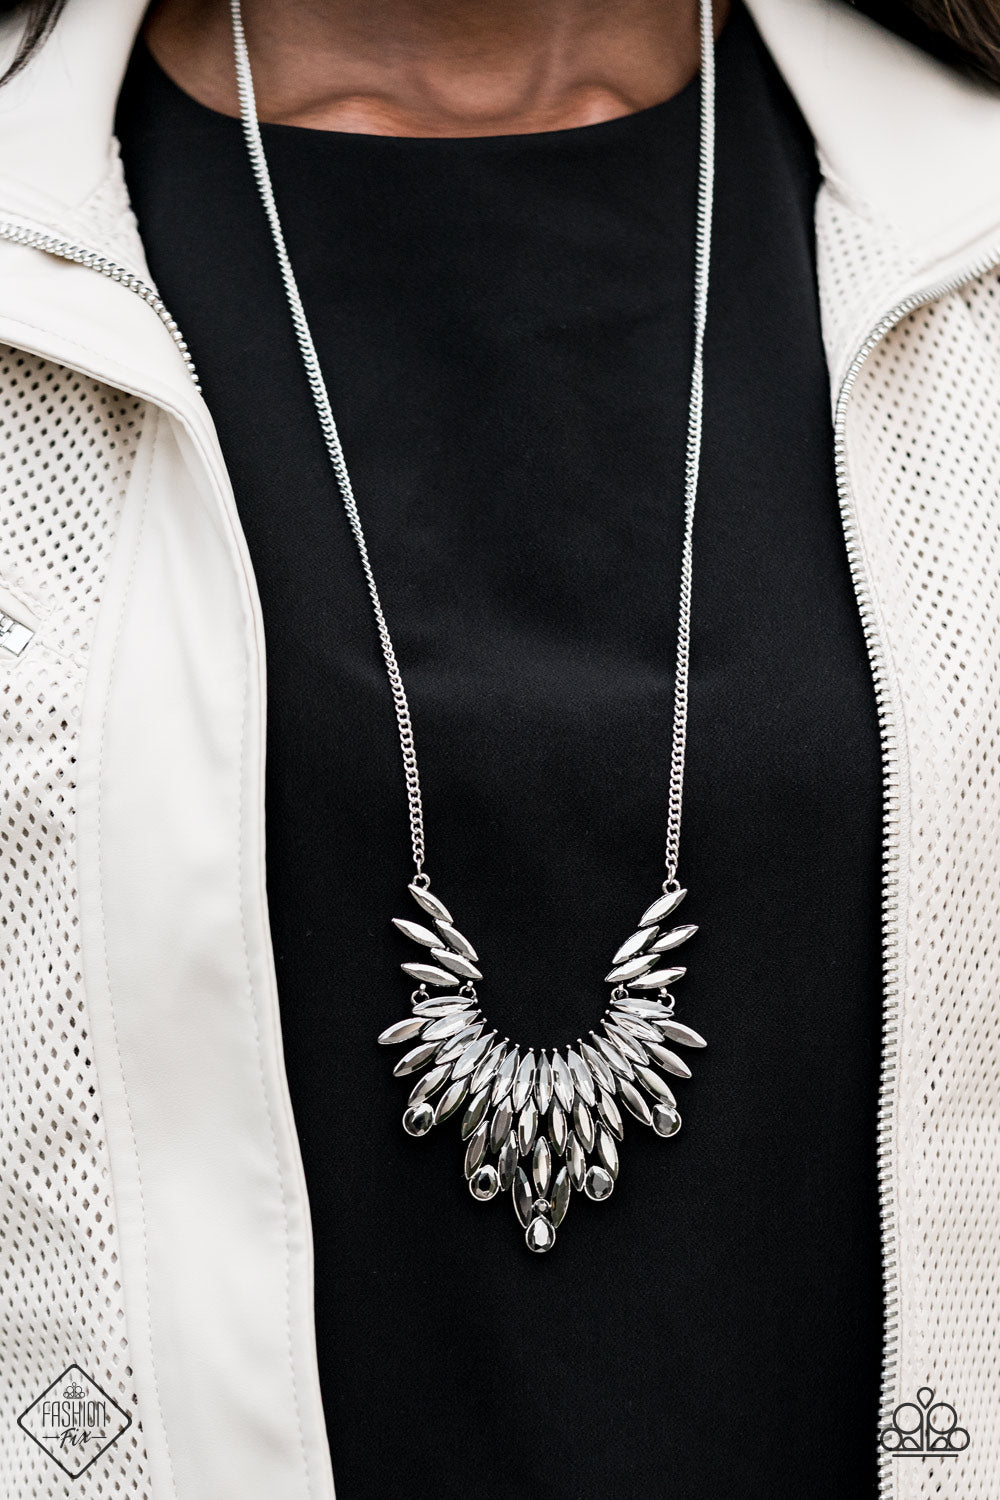 Paparazzi Necklace ~ Leave it to LUXE -Fashion Fix Oct2020 - Silver